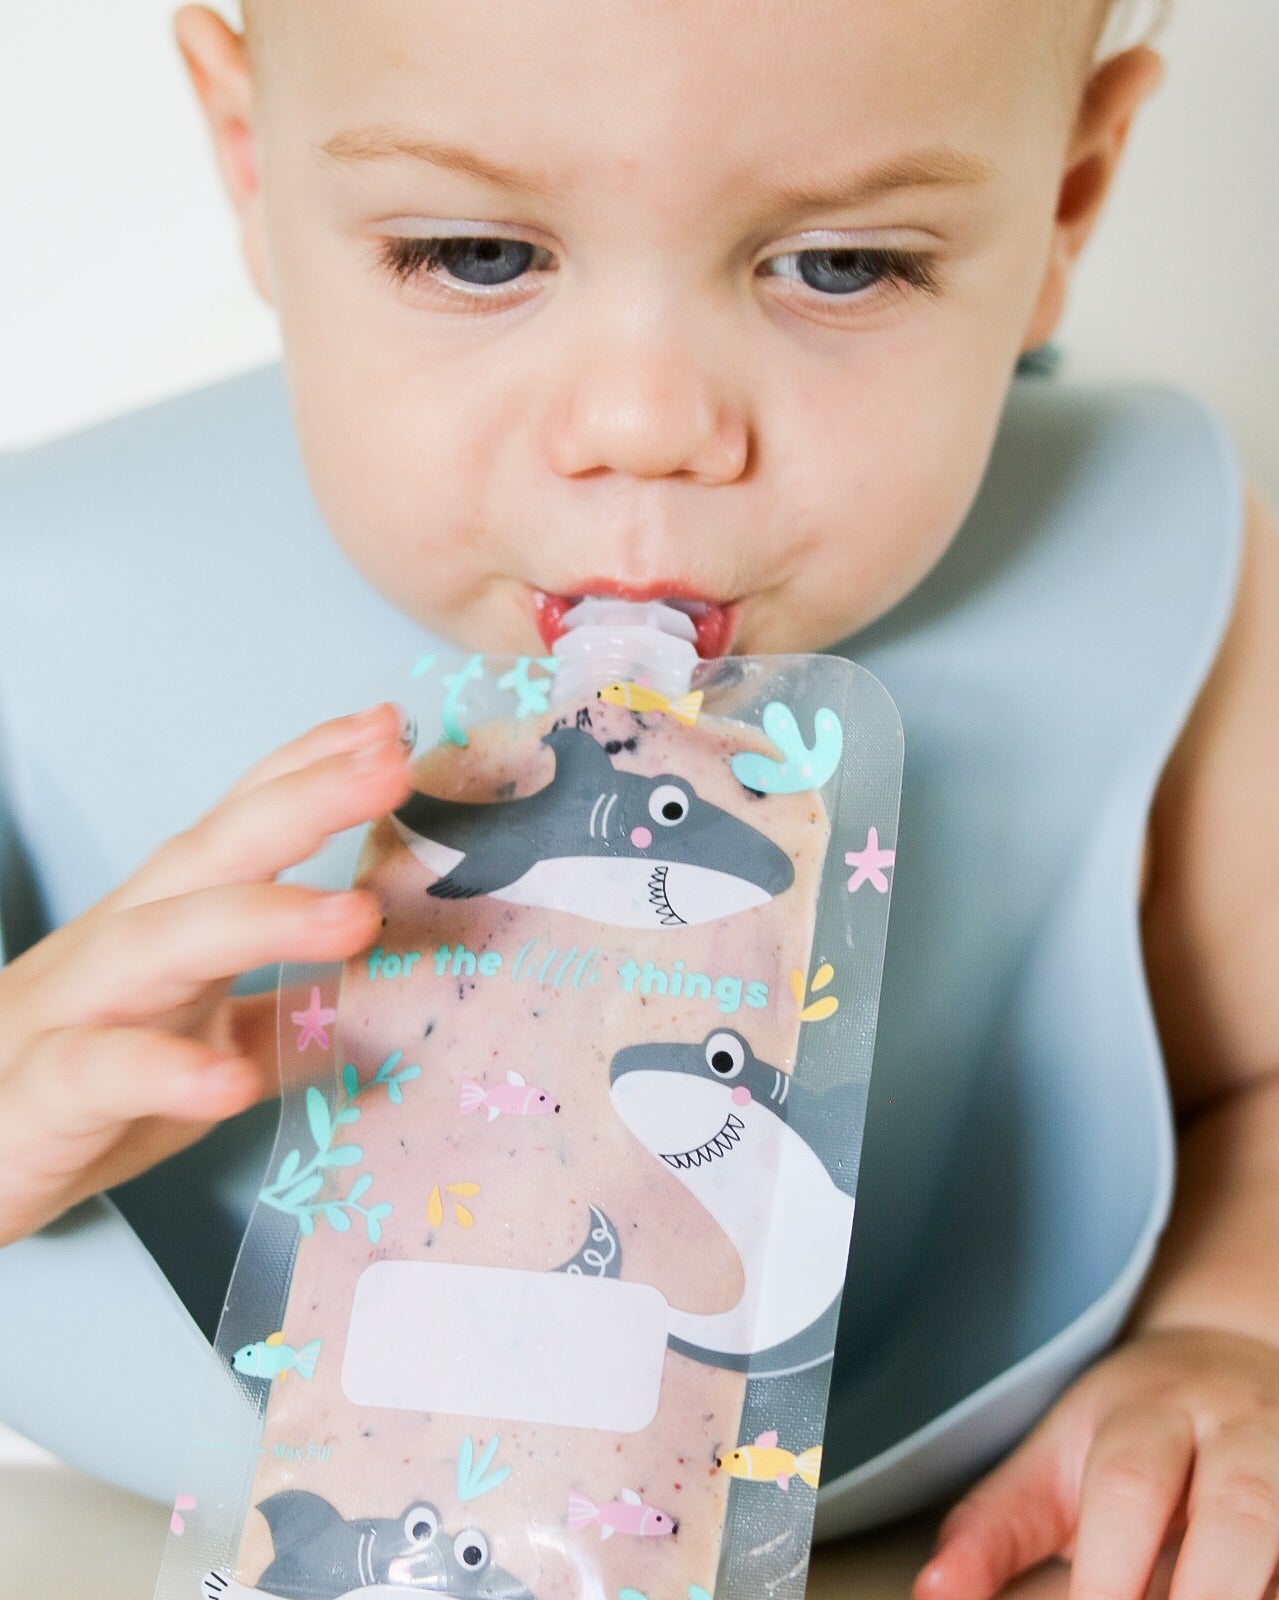 5 tips to get a fussy baby to eat